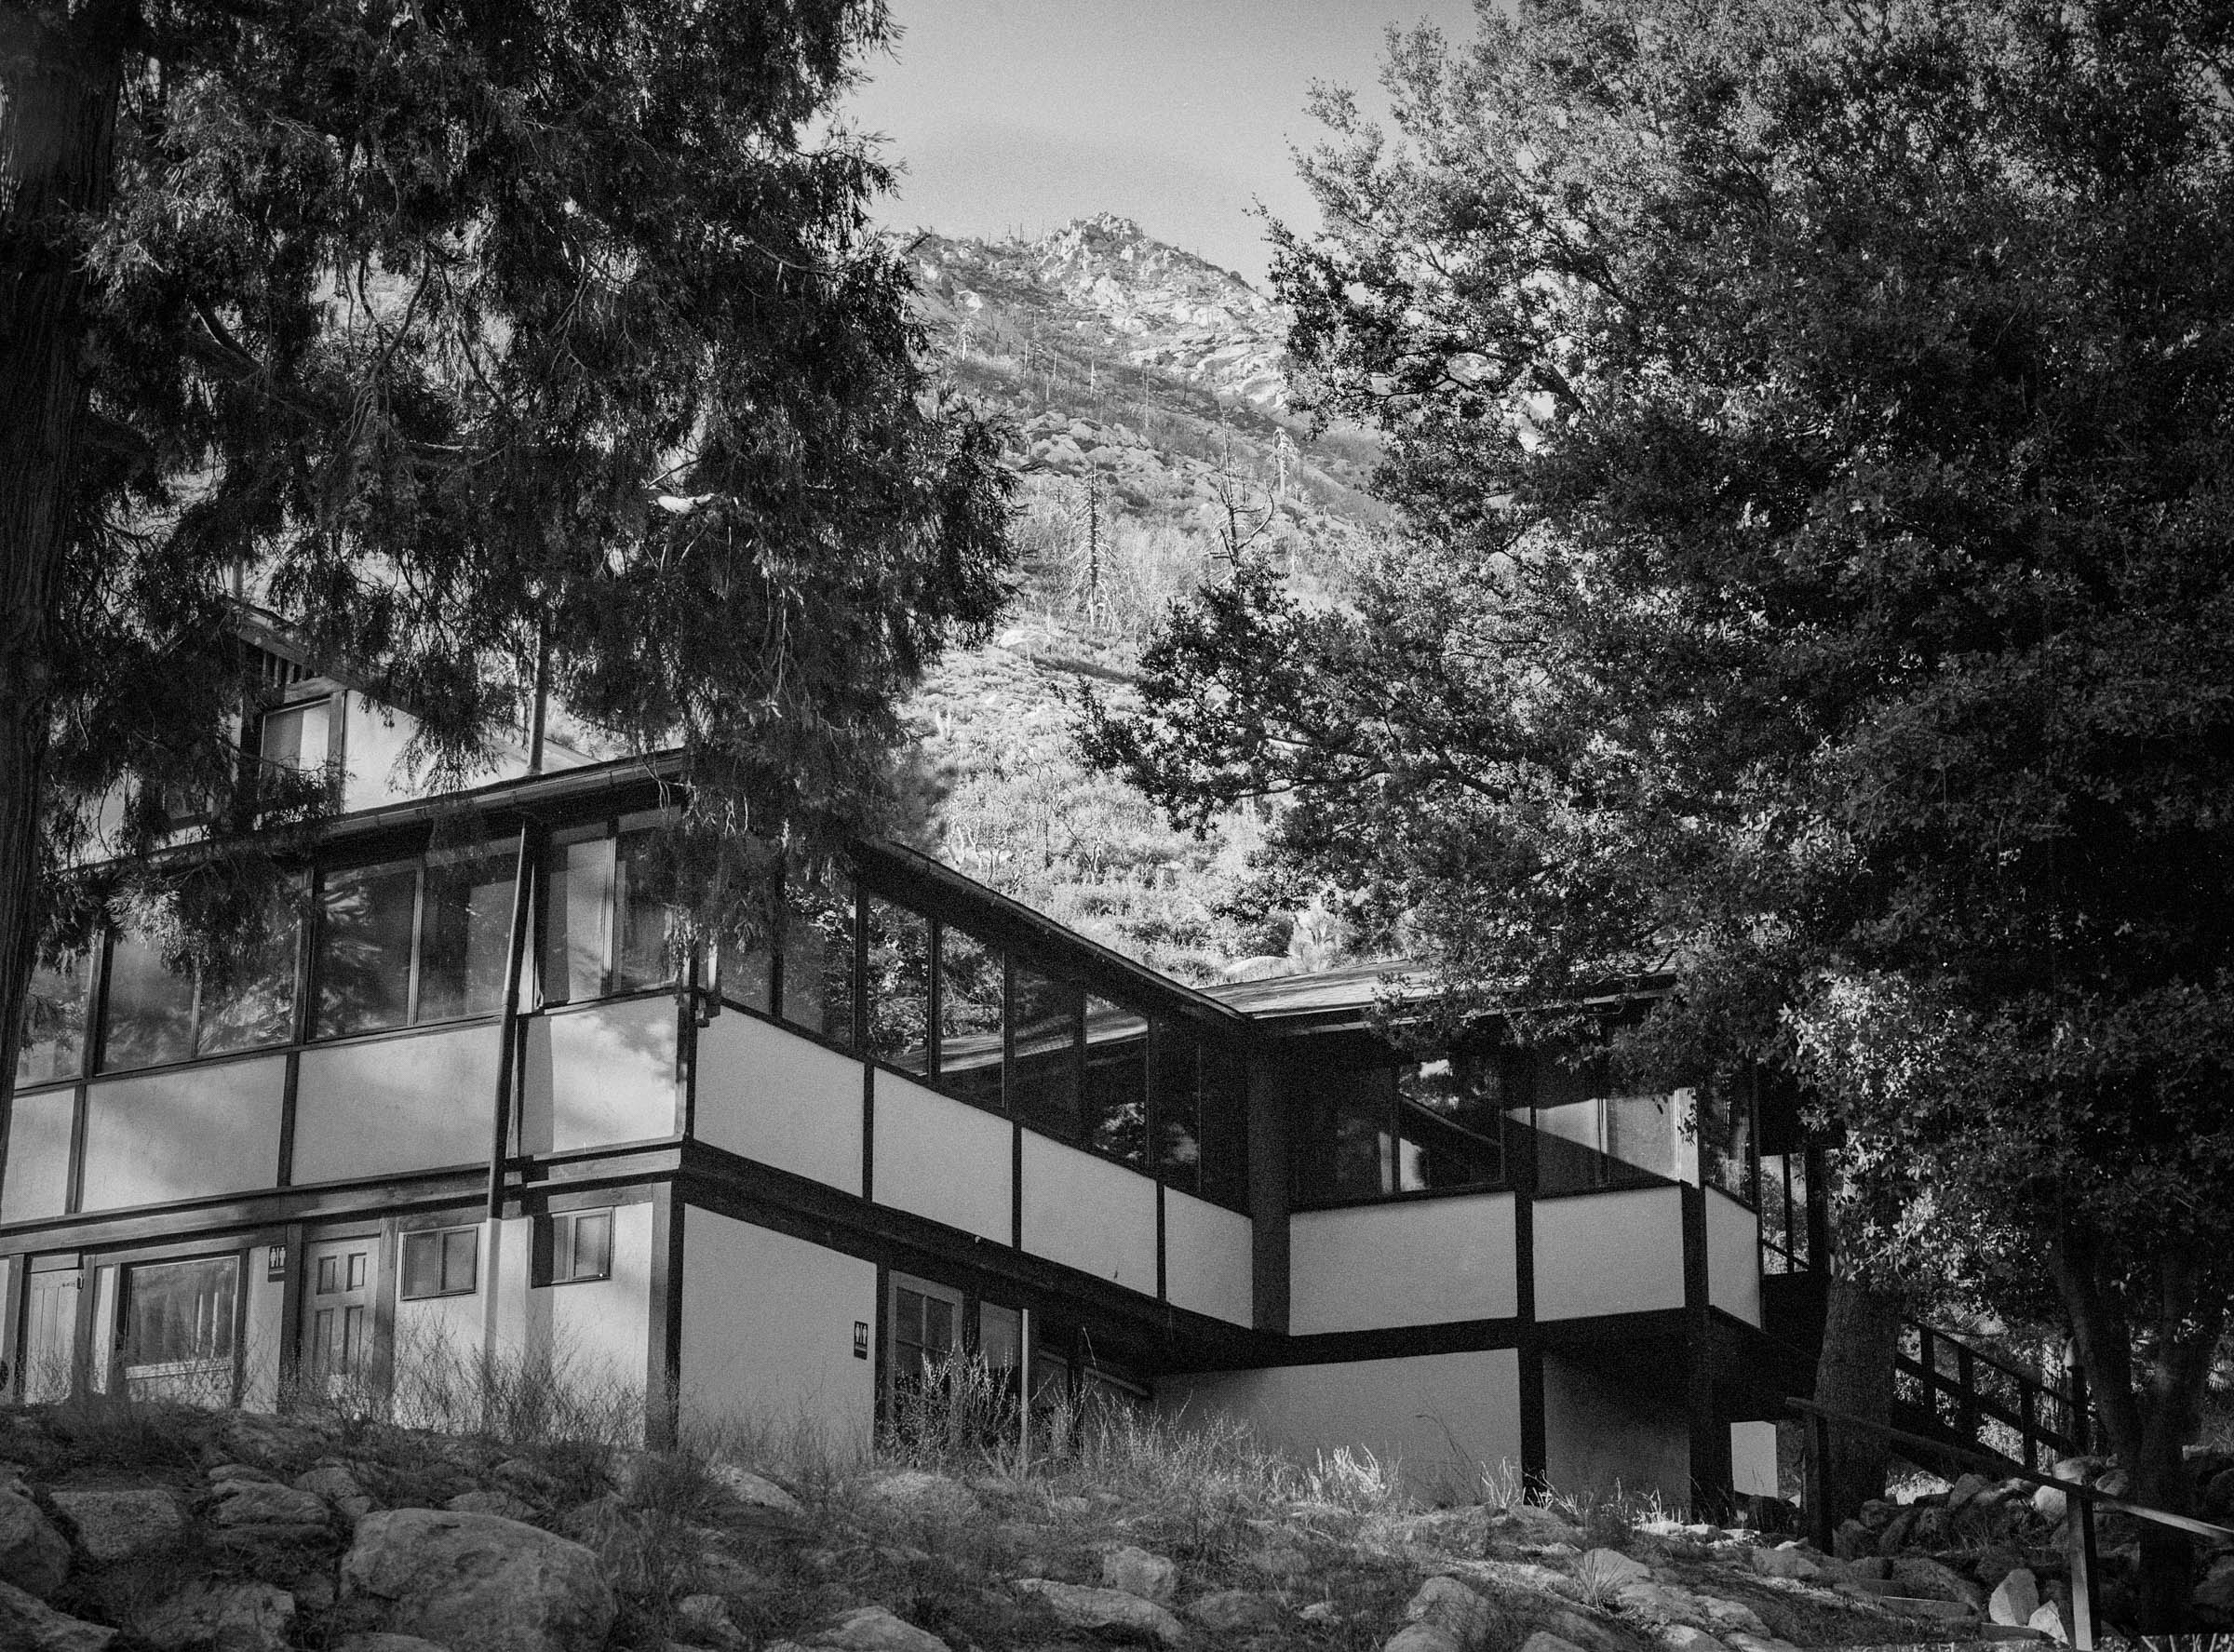 Black and white photo of Yokoji Zen Mountain Center, a Japanese-style building among pine trees, with a mountain in the background.